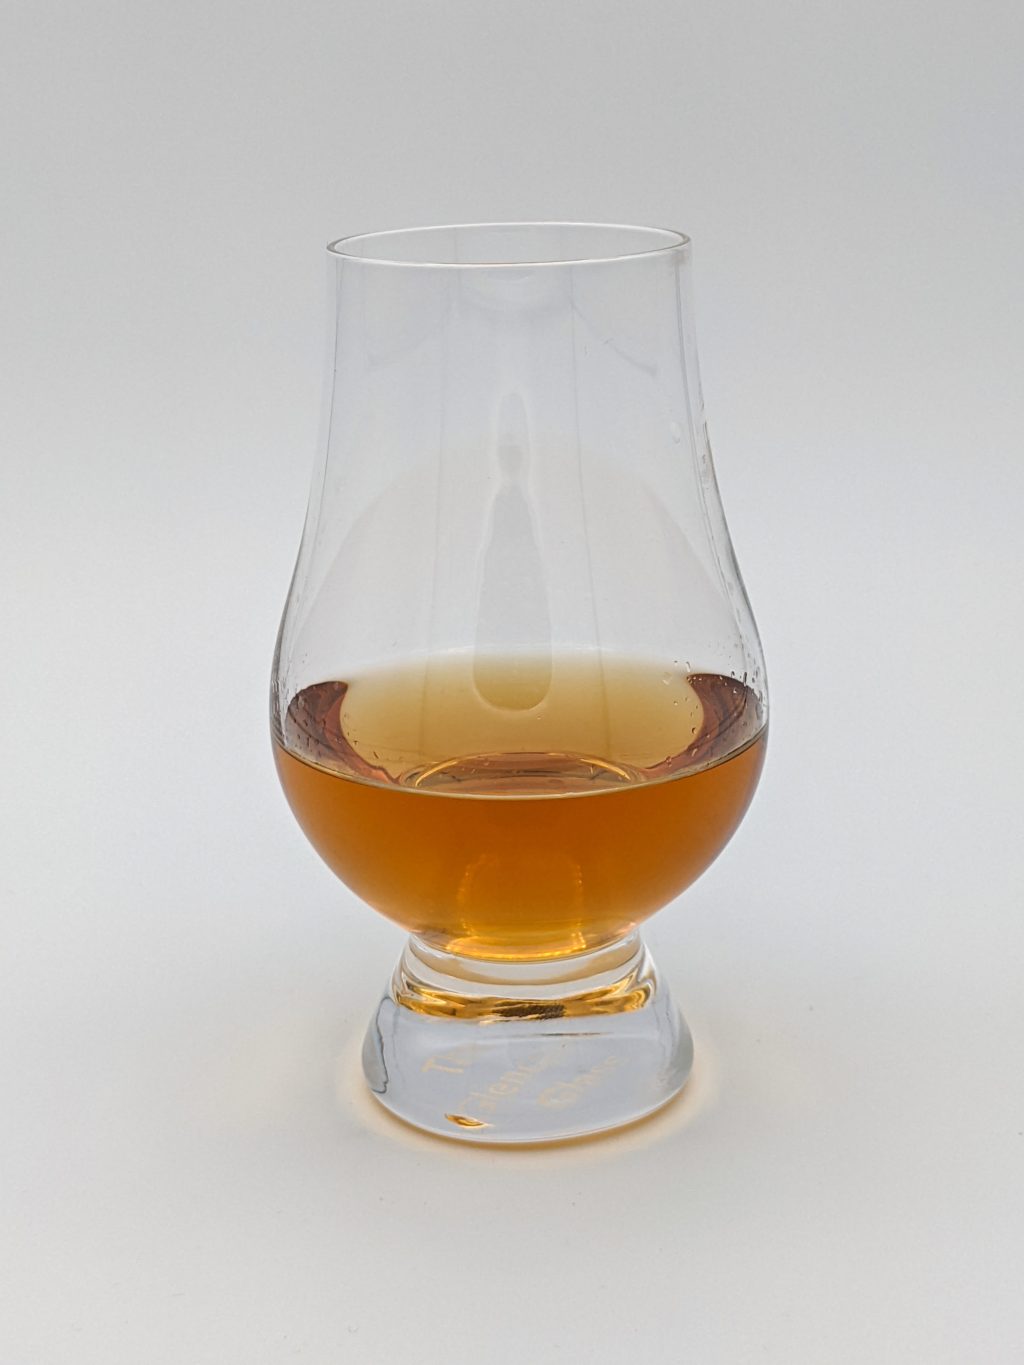 Light brown colored liquid in a glencairn glass